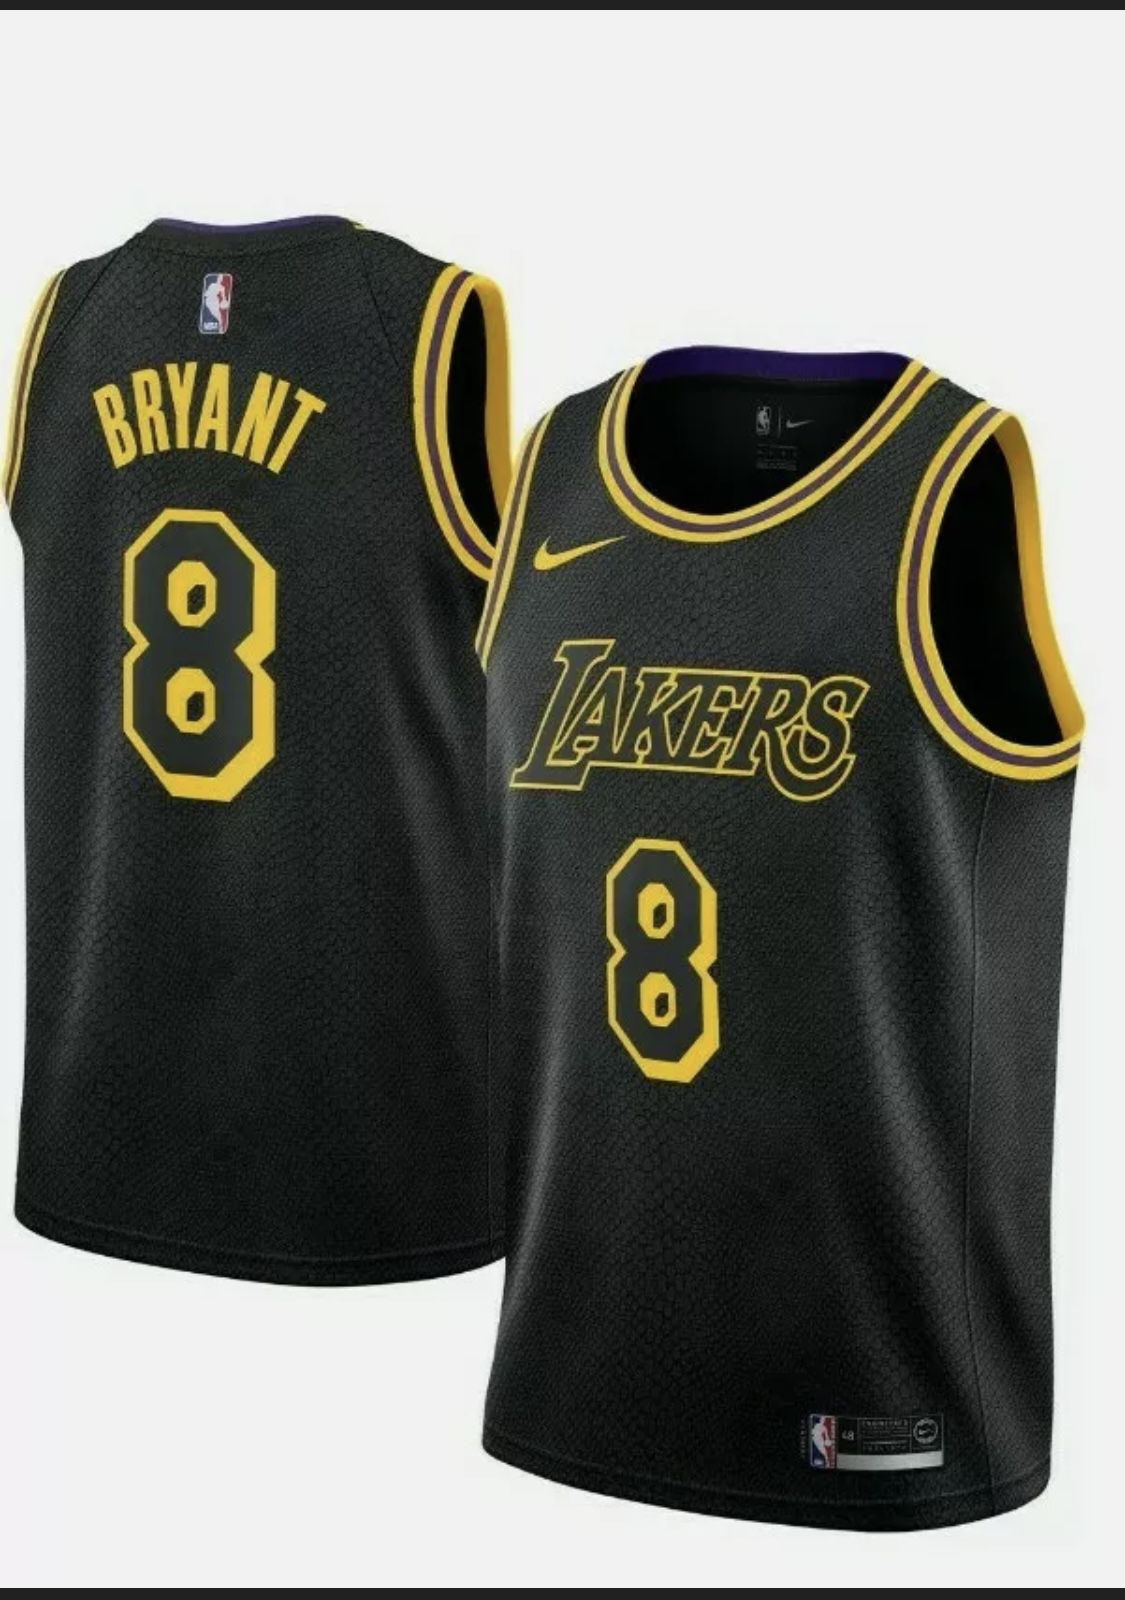 Kobe Bryant Lakers City Edition XL for Sale in Moreno Valley, CA - OfferUp